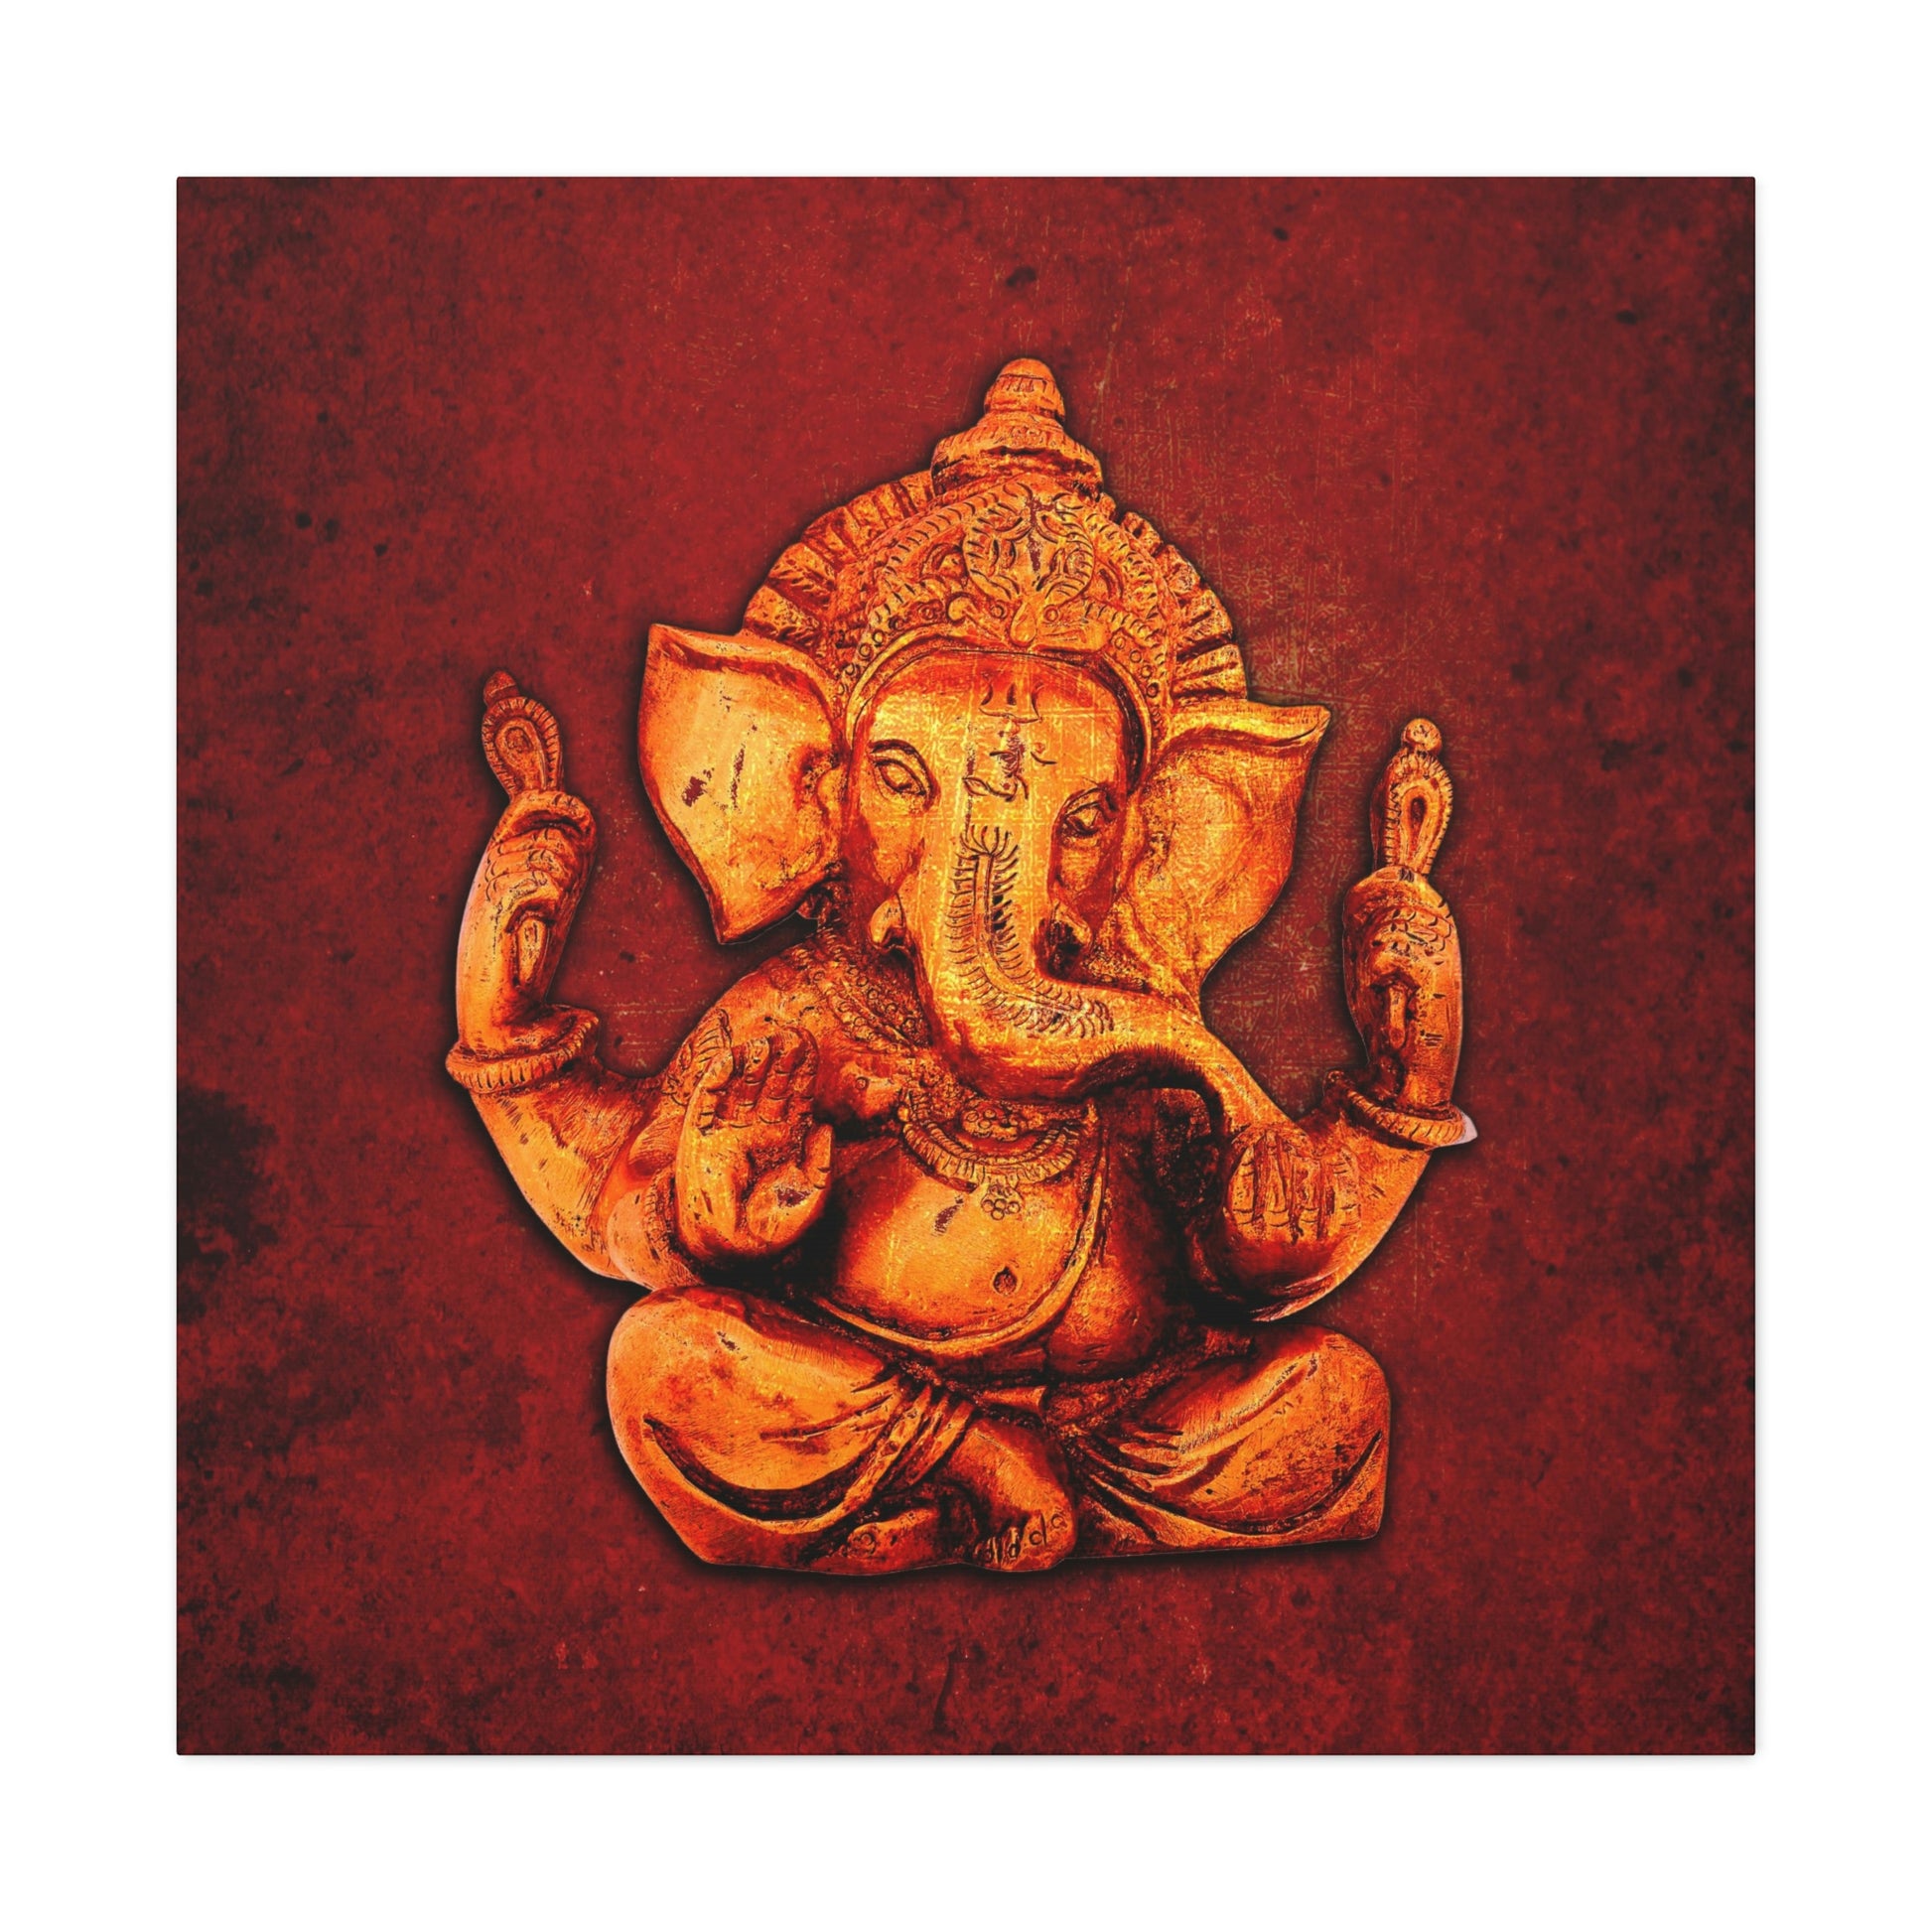 Ganesha on a Distressed Lava Red Background Print on Unframed Stretched Canvas 5 sizes available